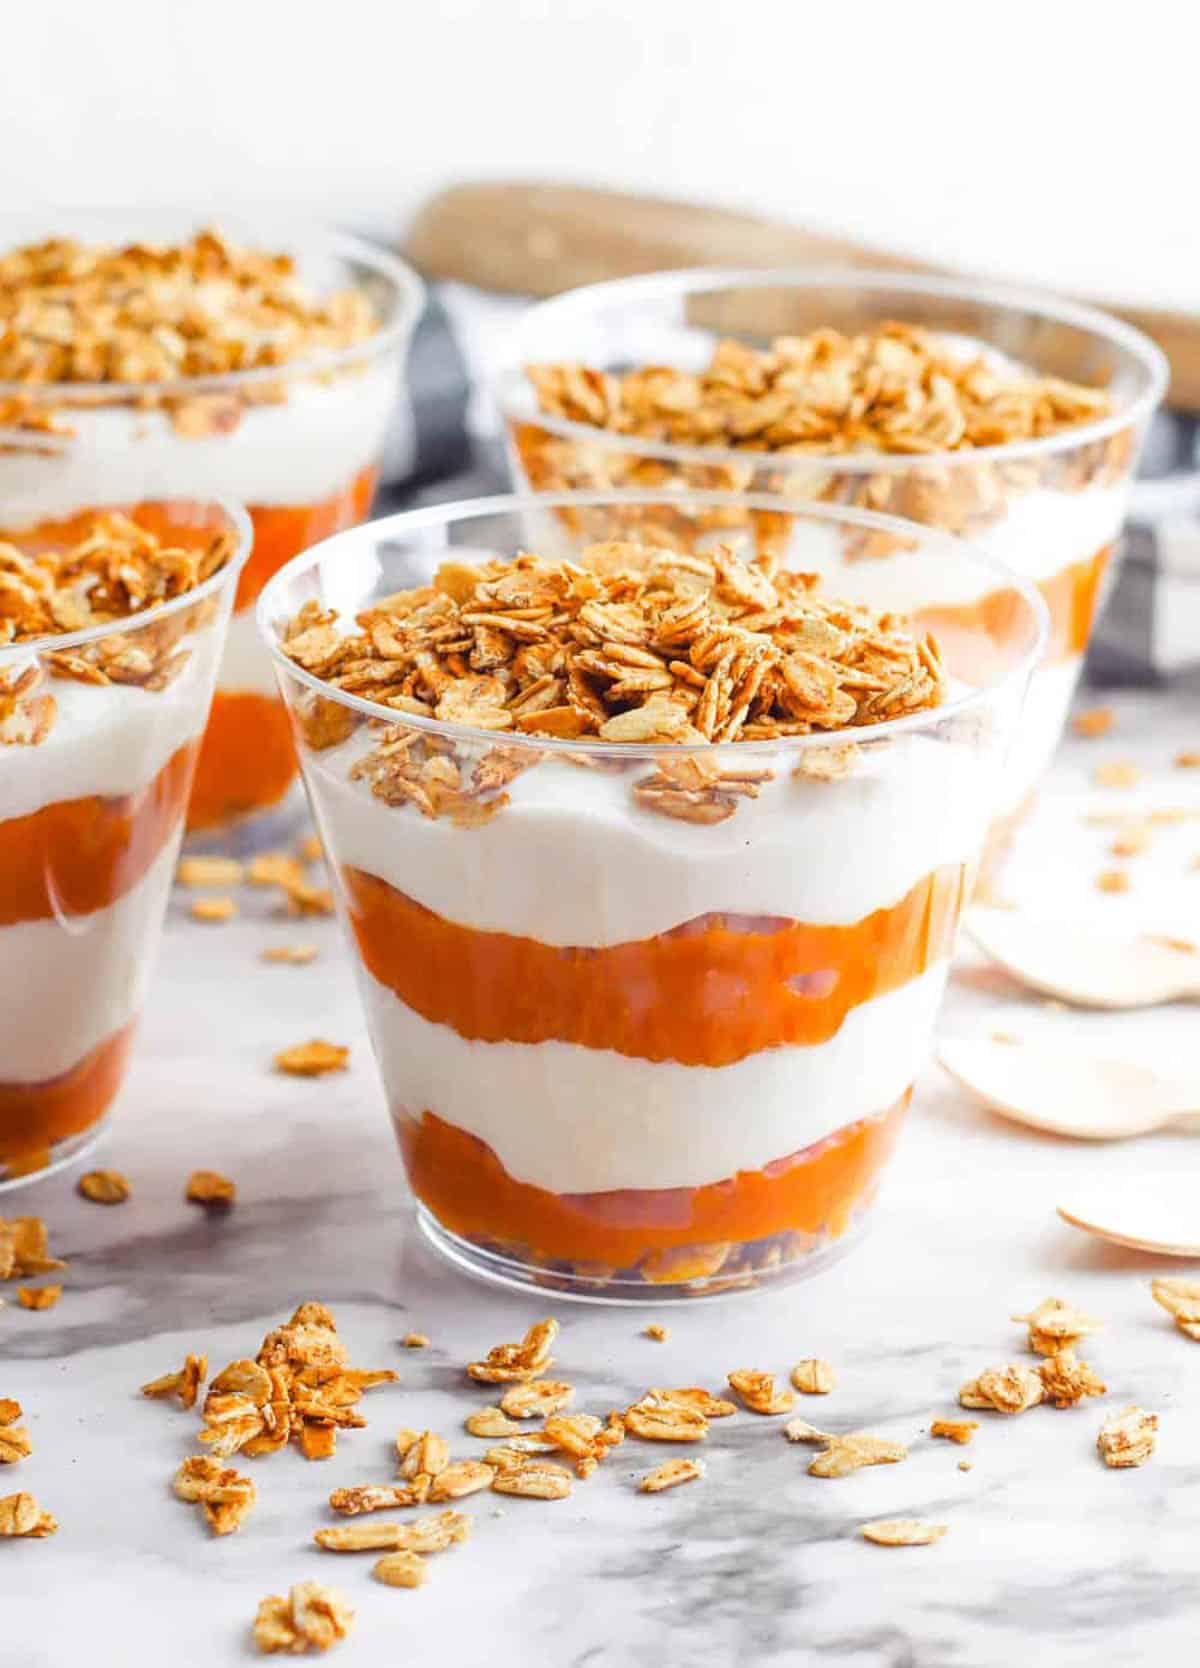 Pumpkin yogurt parfaits served in glasses, topped with granola.